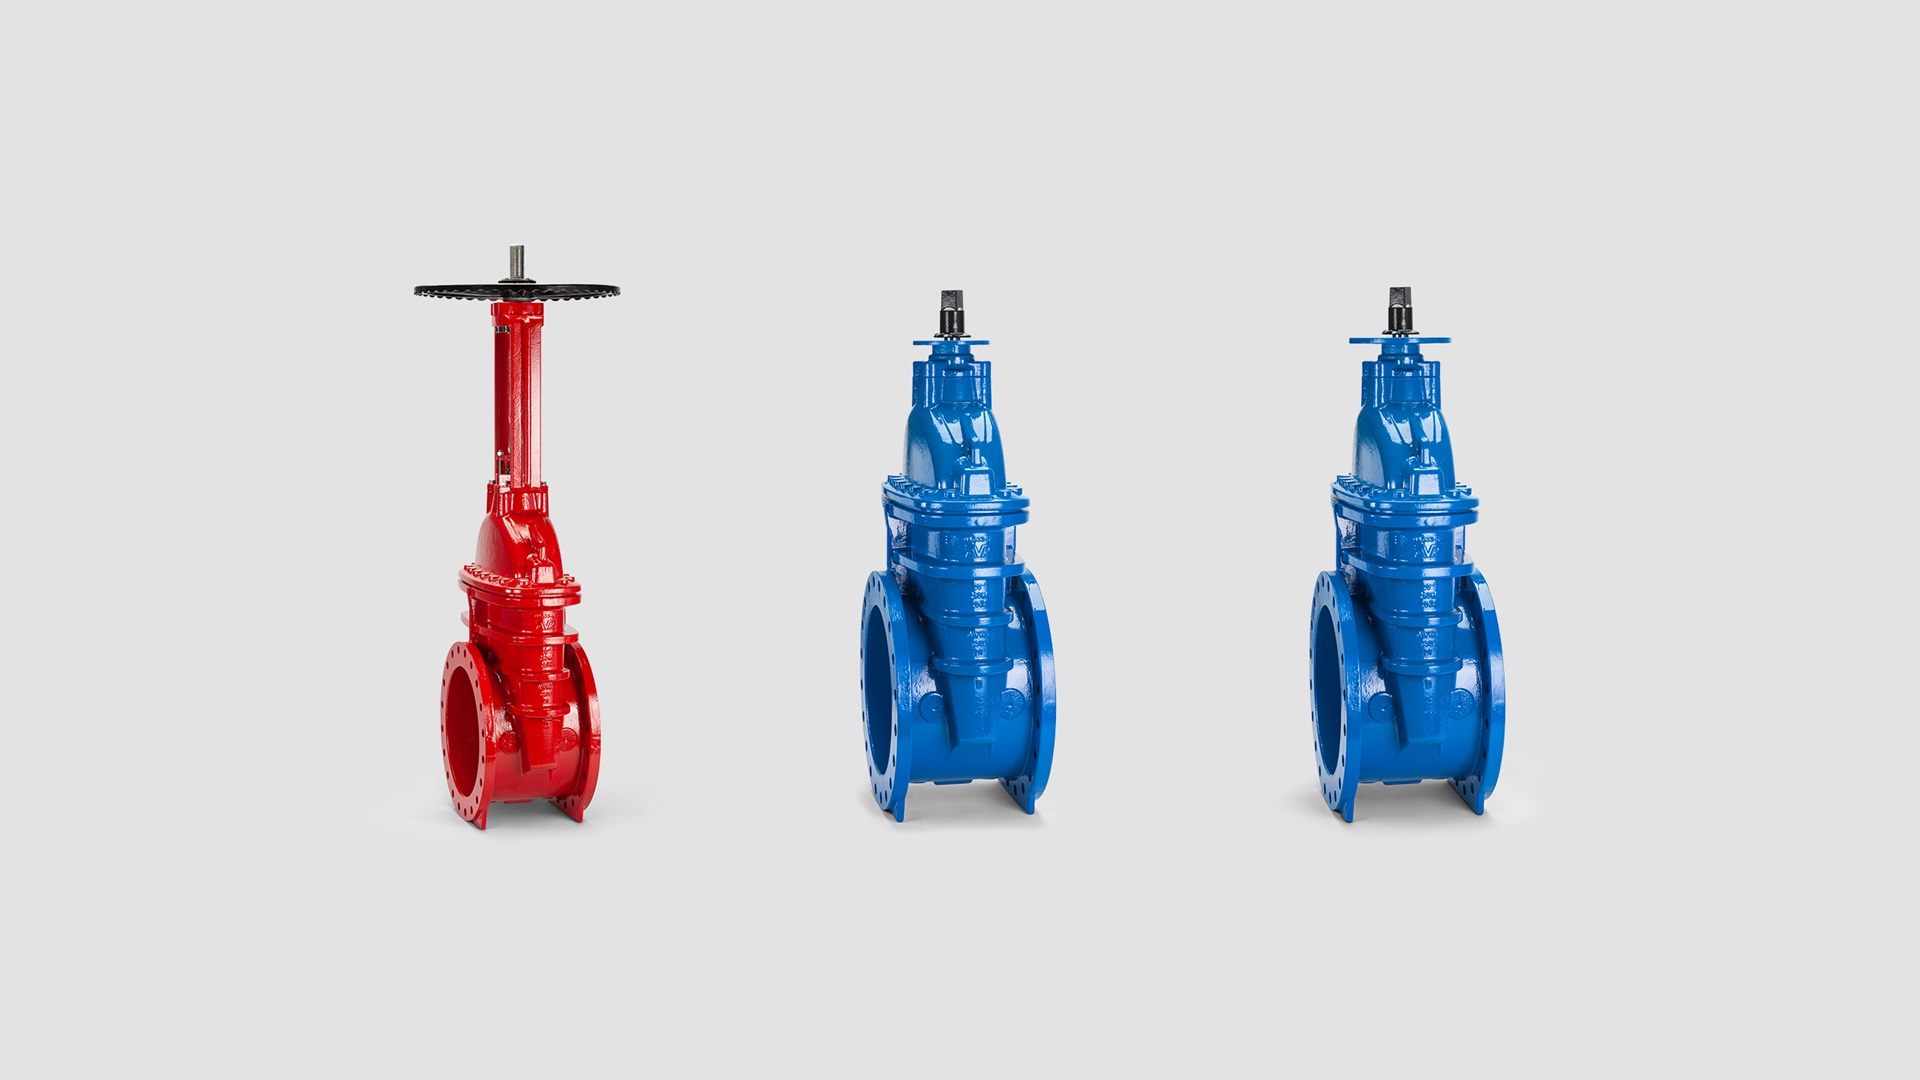 We introduce our new range of large diameter resilient seated gate valves for fire protection applications